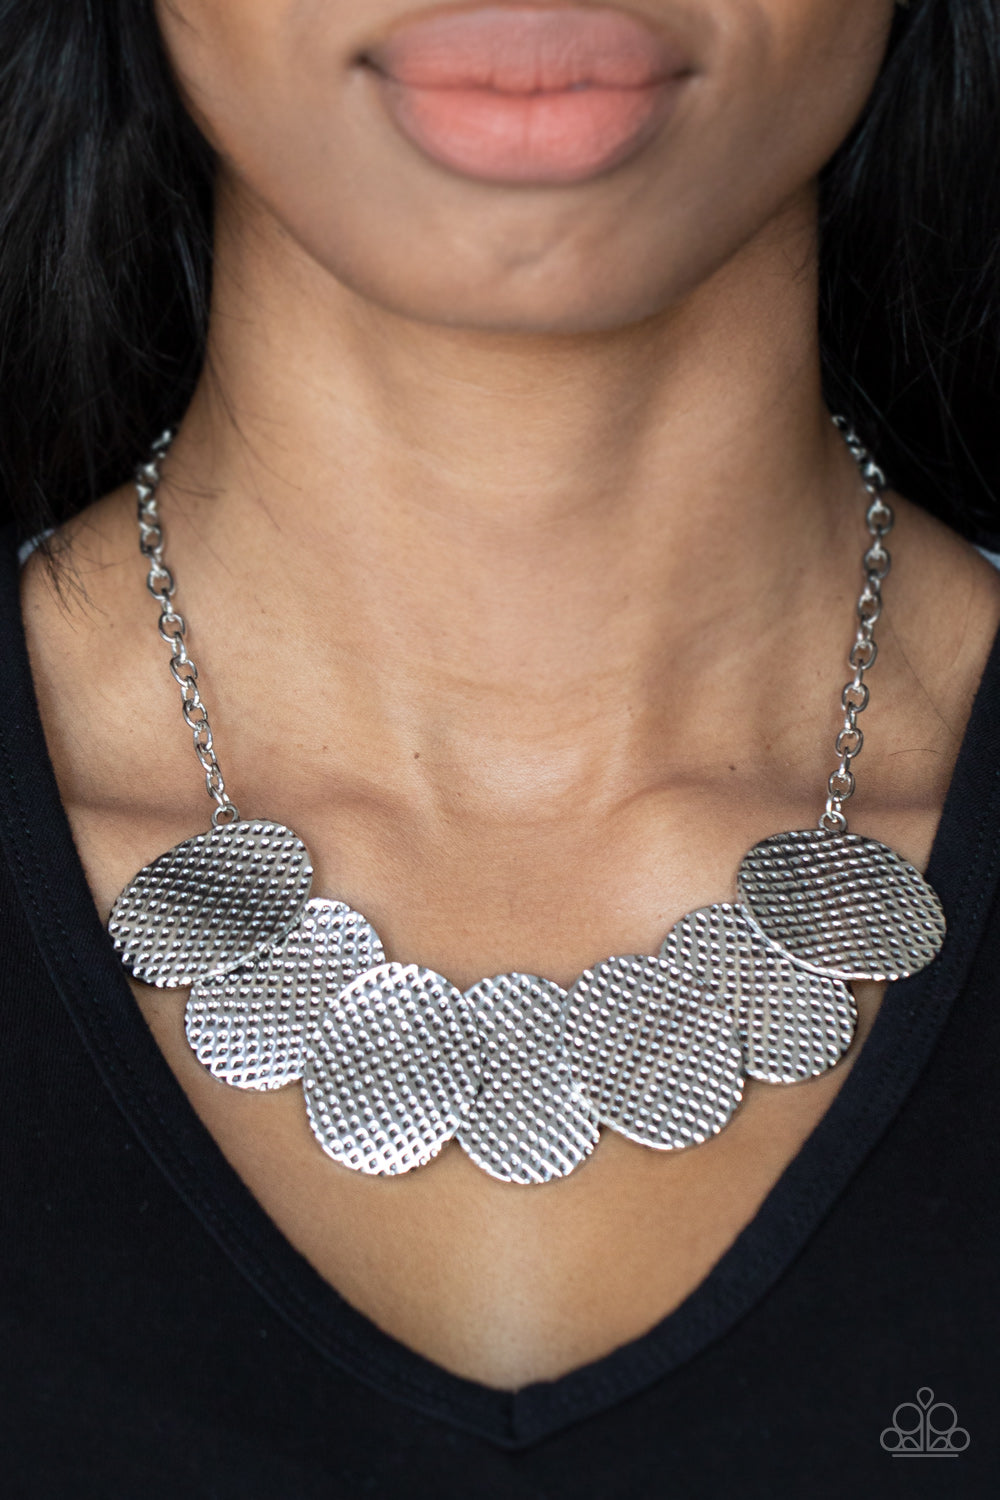 Industrial Wave Silver Necklace - Paparazzi Accessories Item #P2ST-SVXX-170XX A row of gently warped silver discs link together in an overlapping fashion as they connect on each end to a silver chain. Etched in a hammered antiqued silver finish, the oval discs create an edgy industrial effect below the collar. Features an adjustable clasp closure.  Sold as one individual necklace. Includes one pair of matching earrings.